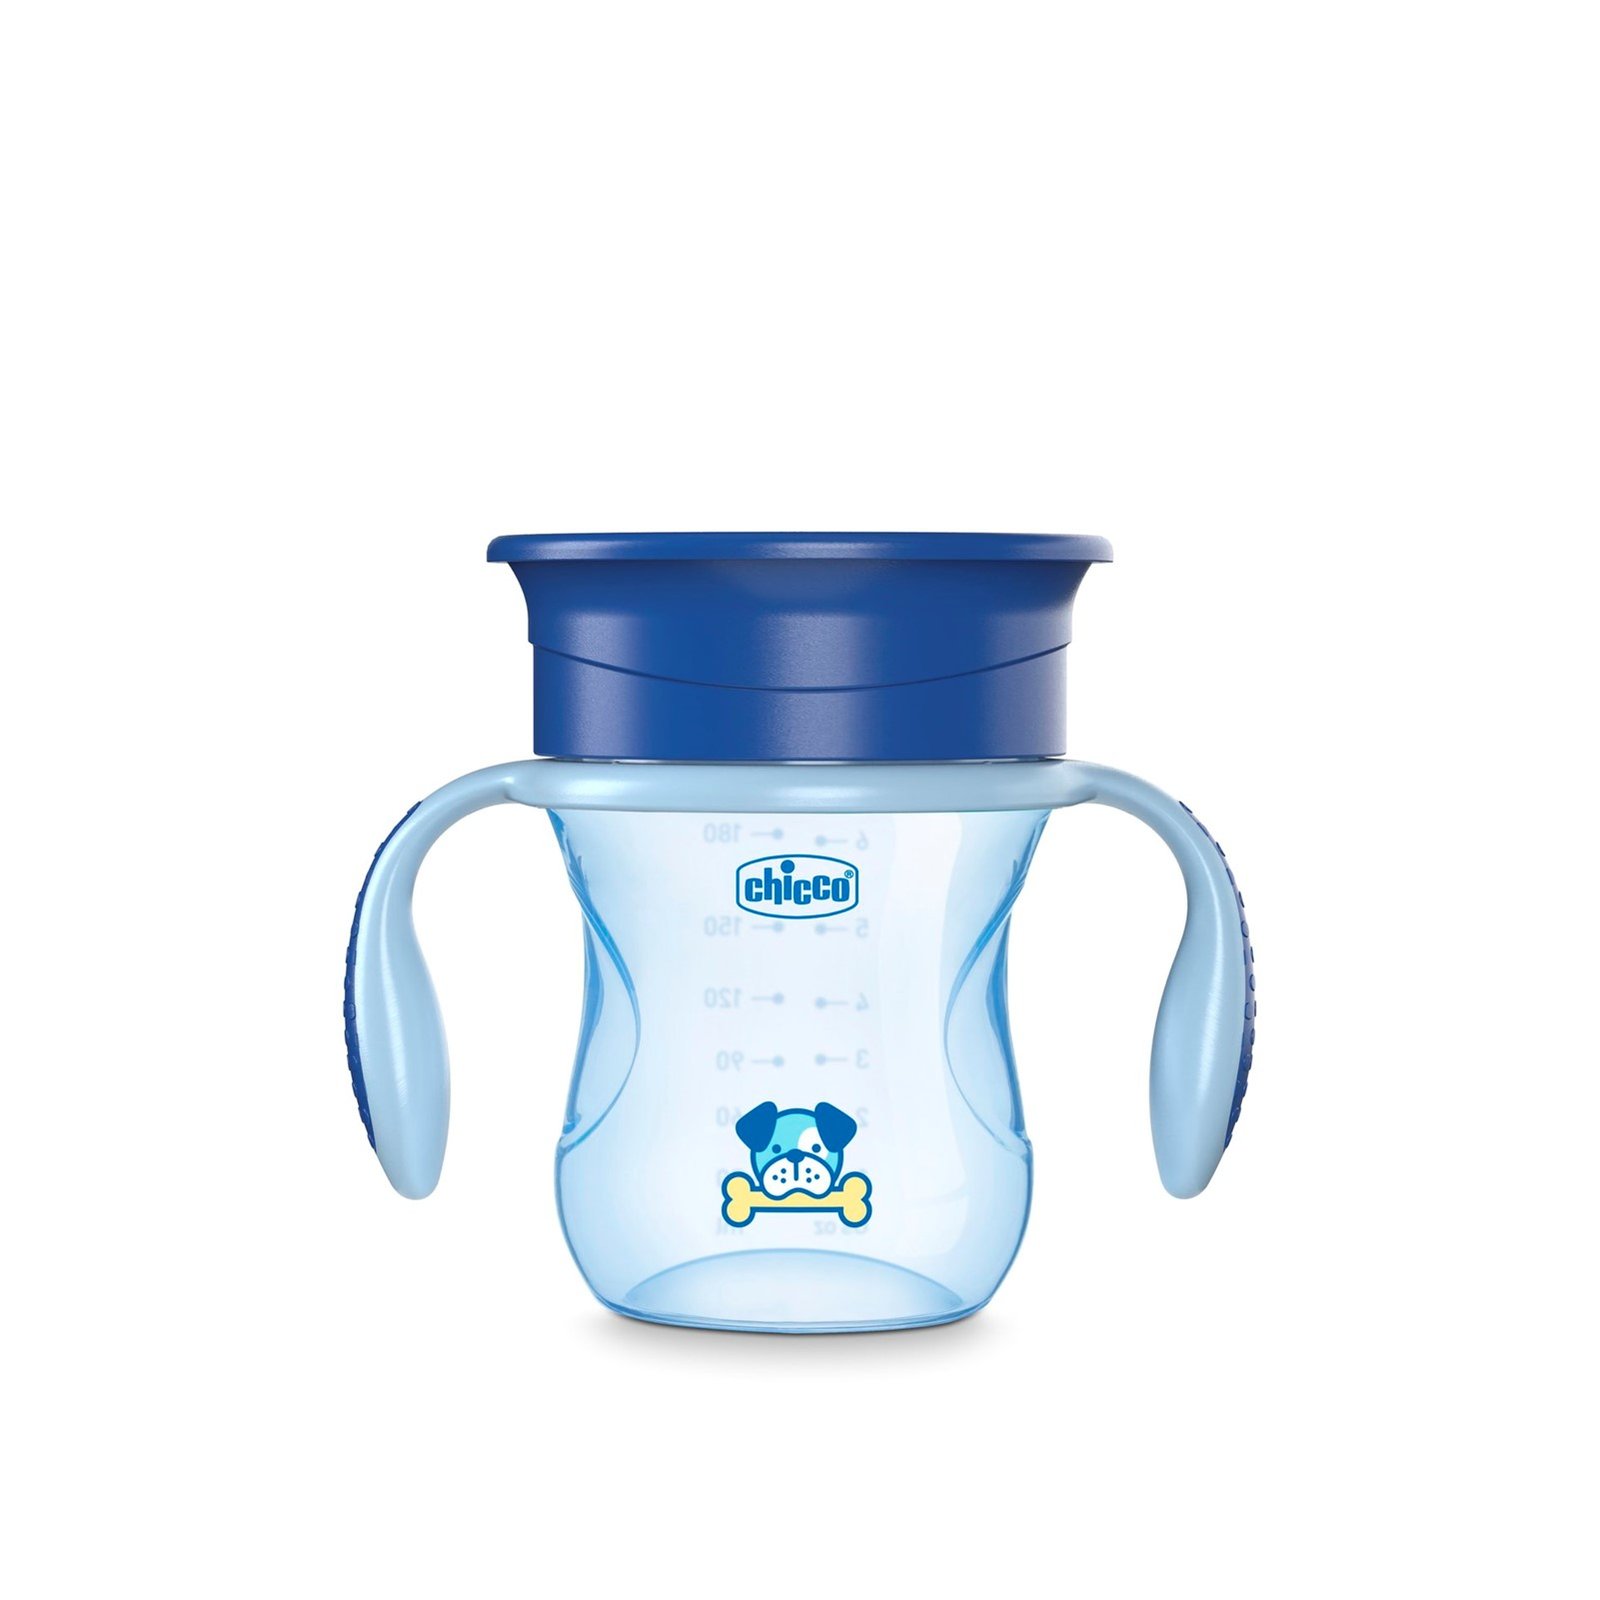 Chicco Mix & Match Perfect Cup Their First Glass 12m+ Blue 200ml (7 fl oz)